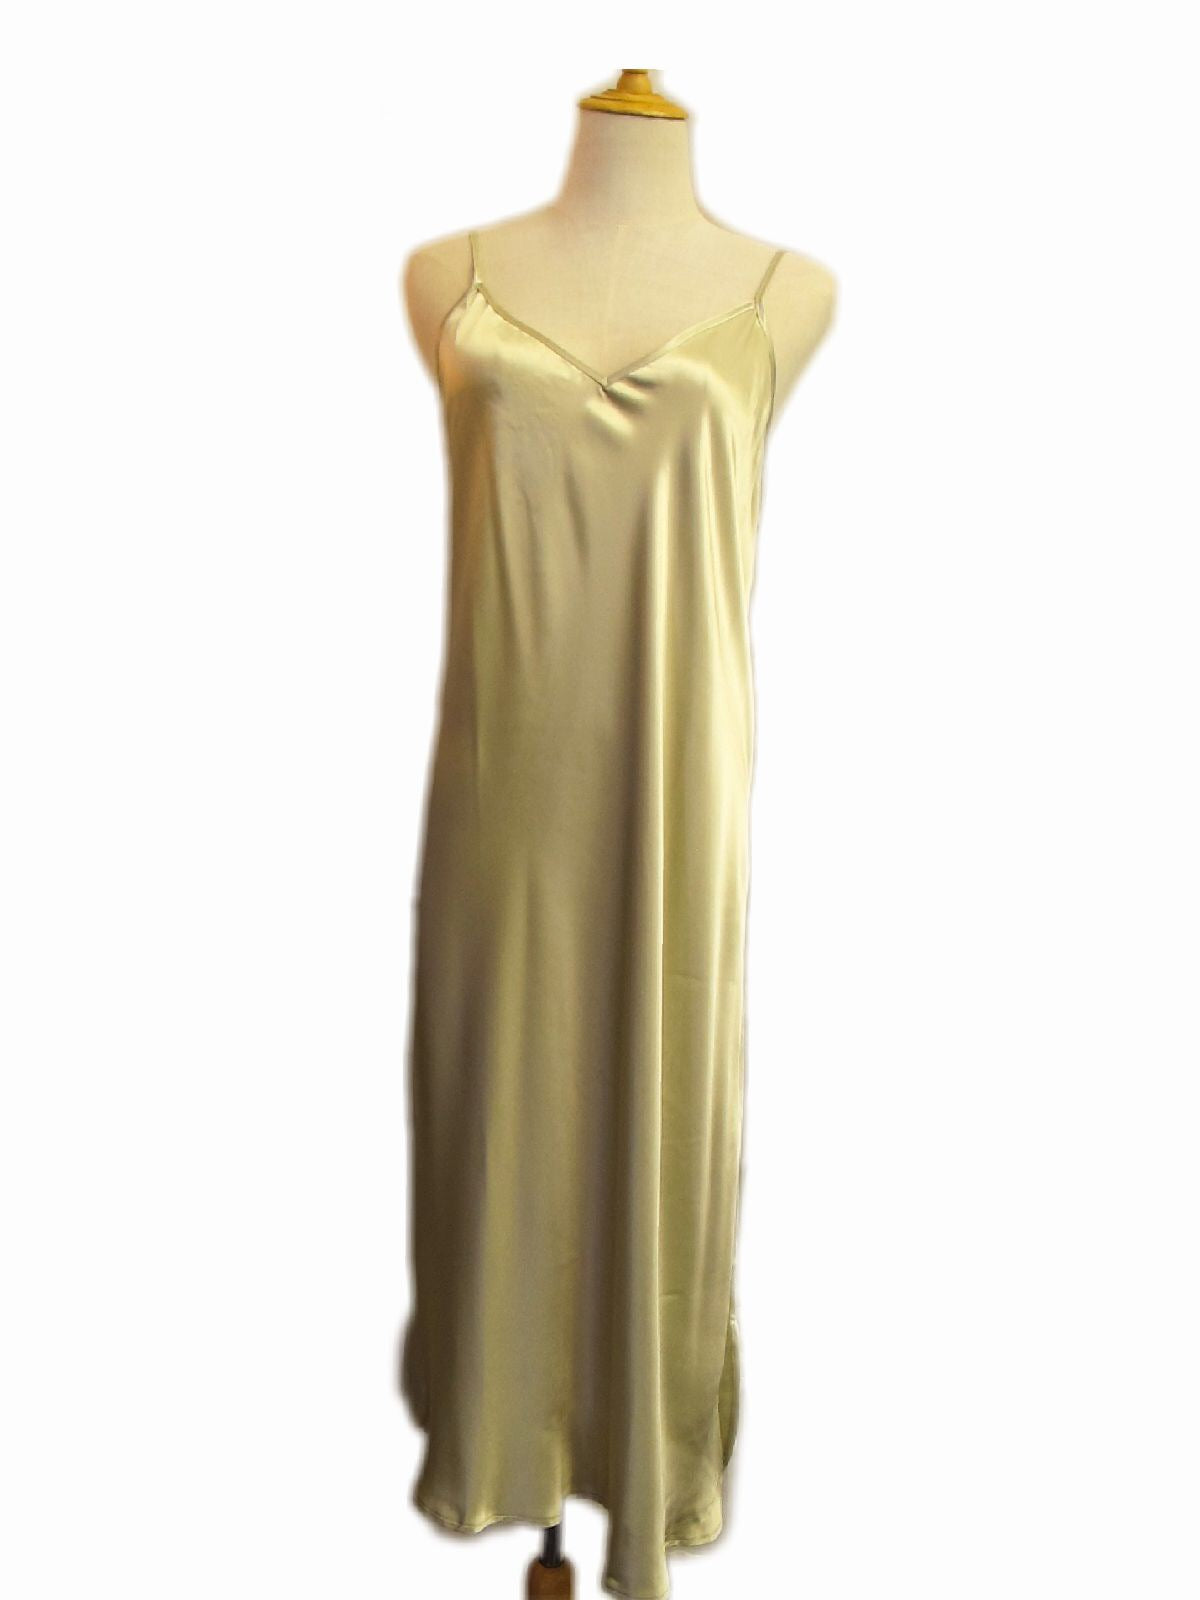 Shoe String Slip Nightdress - Champagne, [product type], Lullaby New Zealand